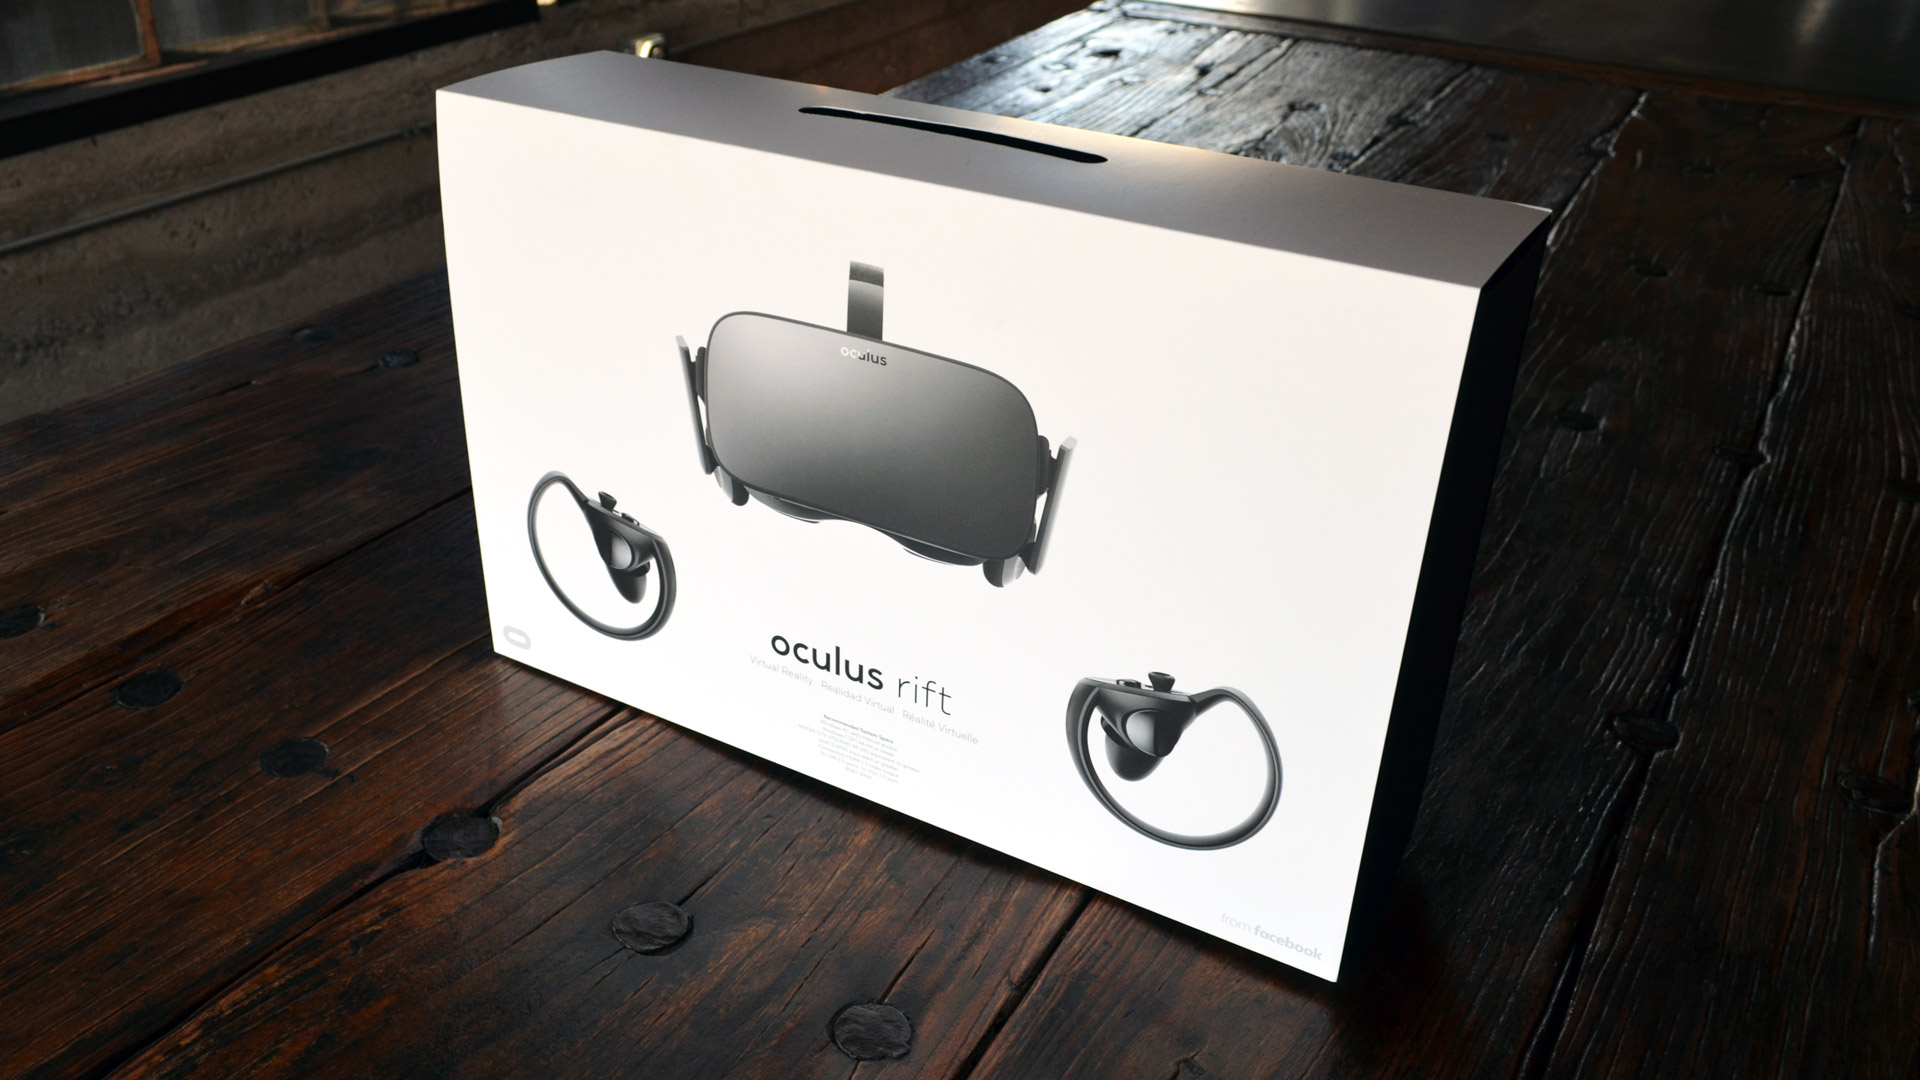 Oculus Rift on Sale $350 at Amazon US – to VR